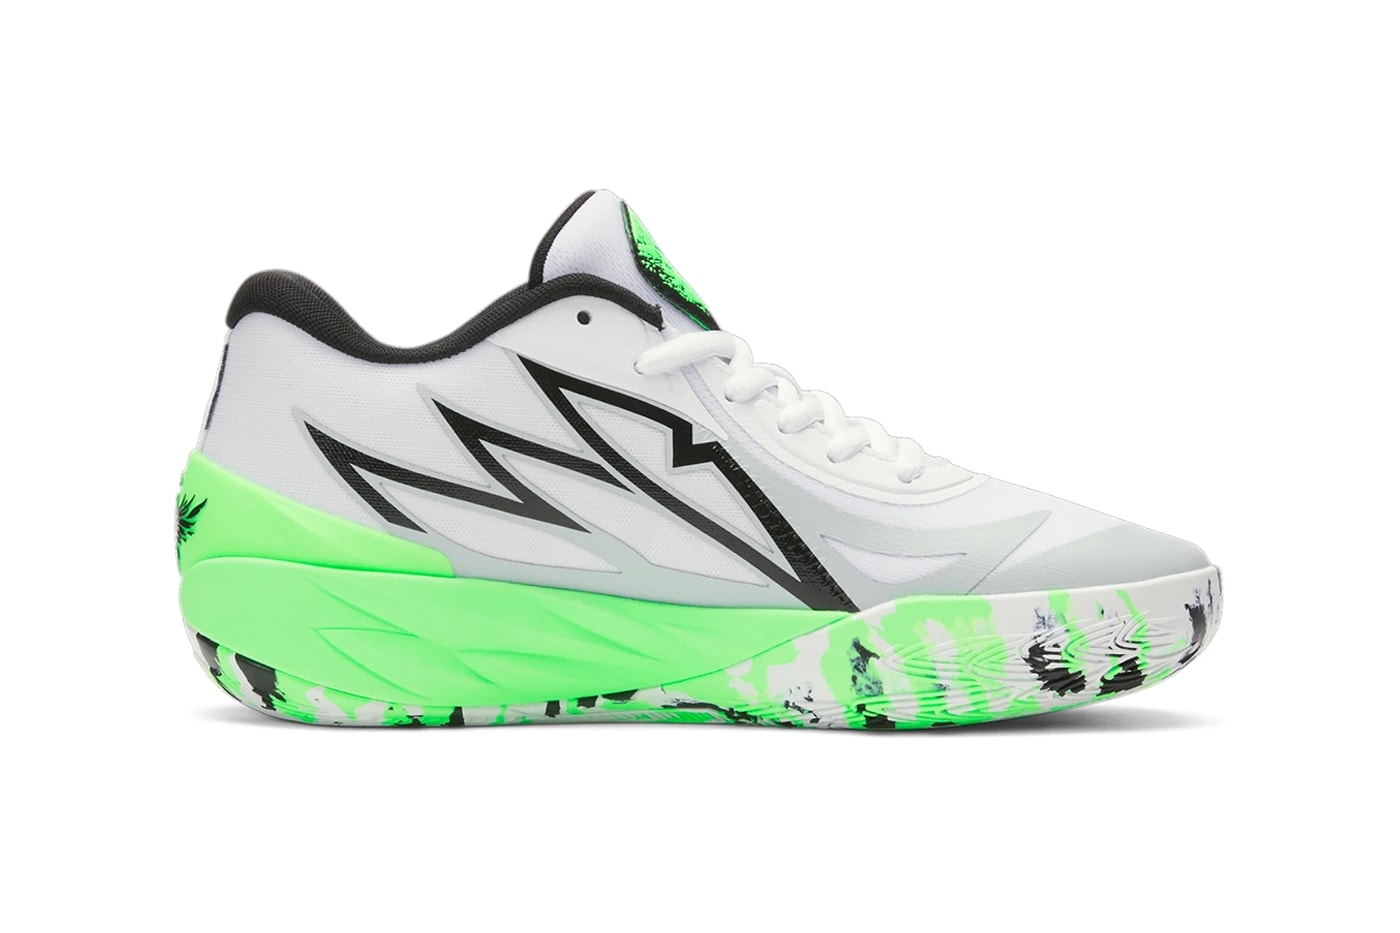 PUMA MB 02 lamelos rookie of the year all star ball brother neon green white grey black hulu cereal release info date price